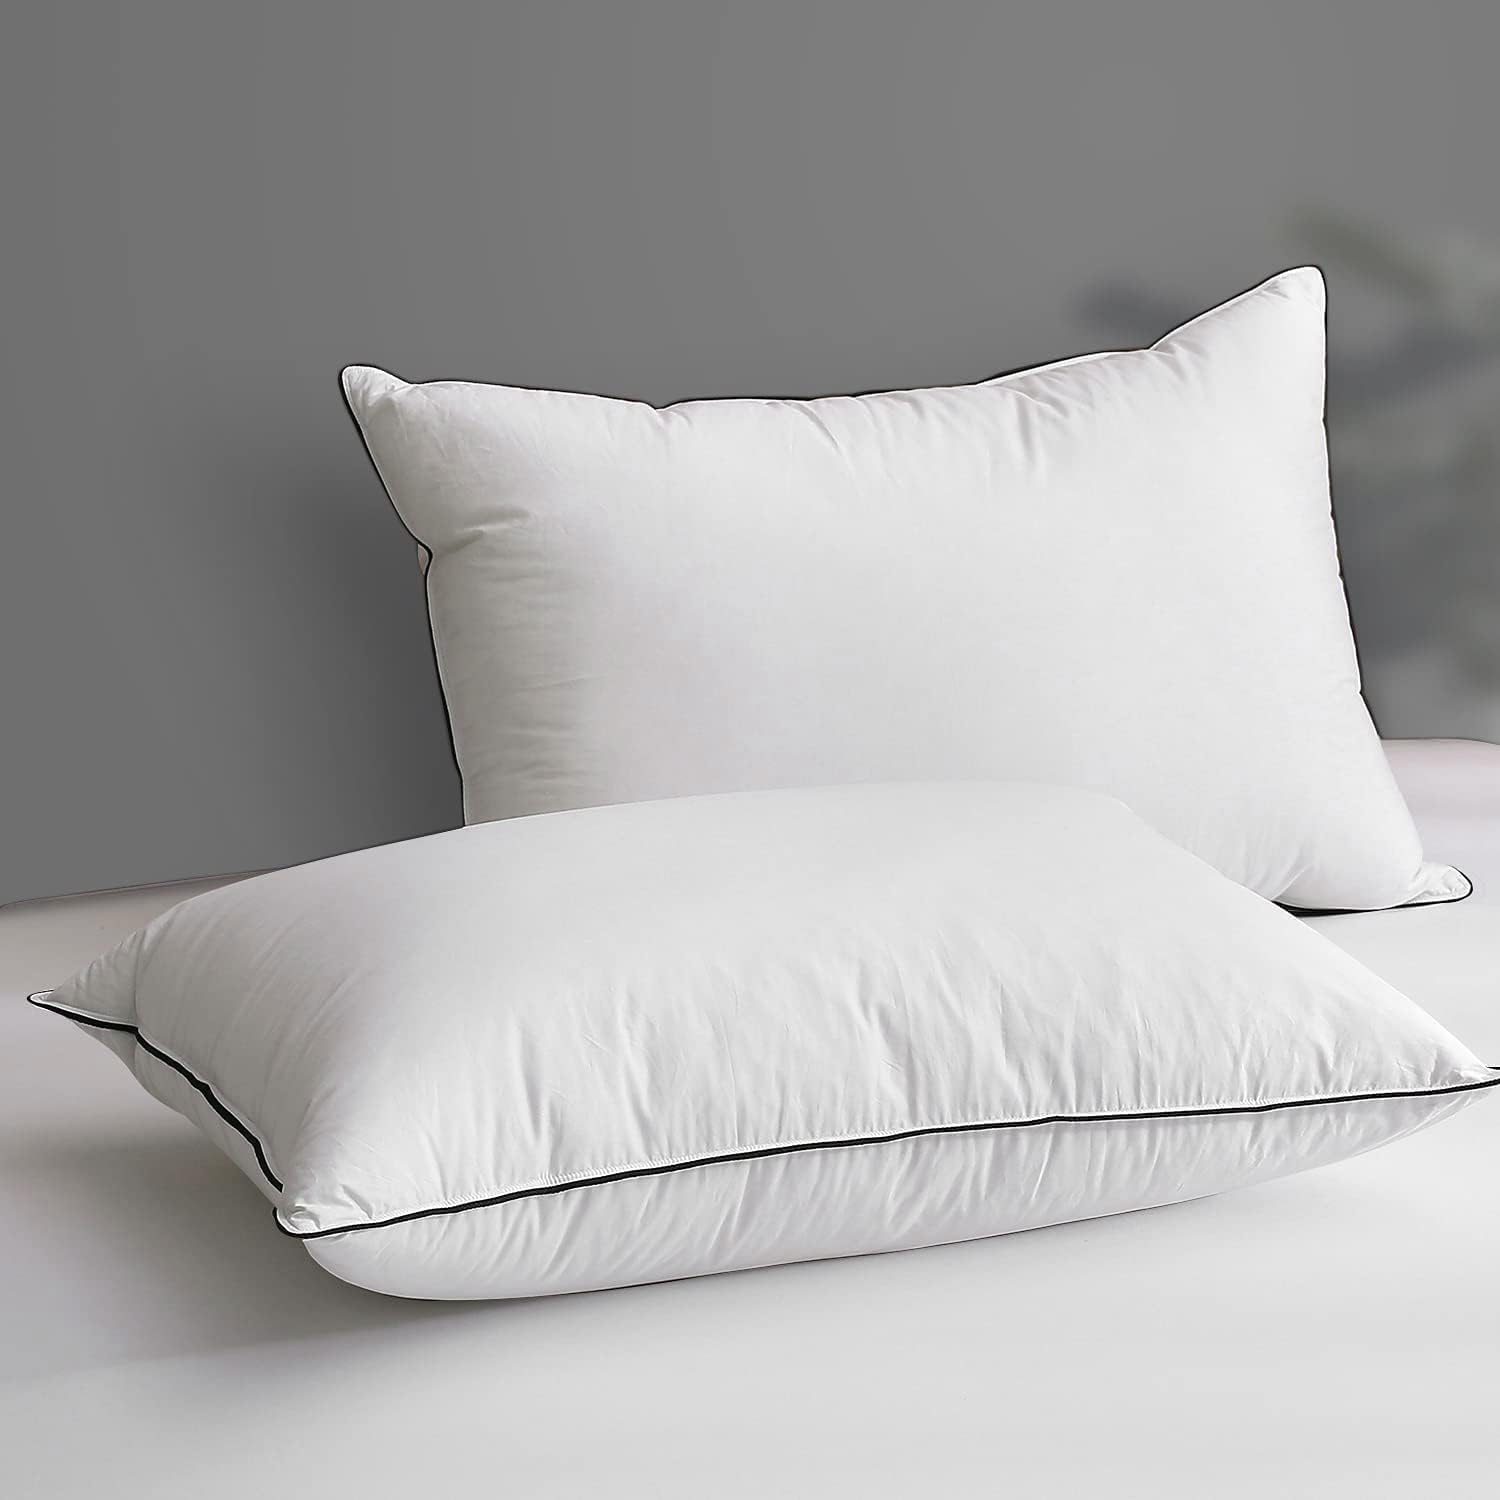 https://bigbigmart.com/wp-content/uploads/2023/08/DWR-Goose-Feather-Down-Pillow-for-Sleeping-2-Pack-King-Size-Organic-Cotton-Hotel-Style-Bed-Pillow-Inserts-Soft-Medium-Pillow-for-Stomach-and-Back-Sleeper-20x36-Set-of-2.jpg